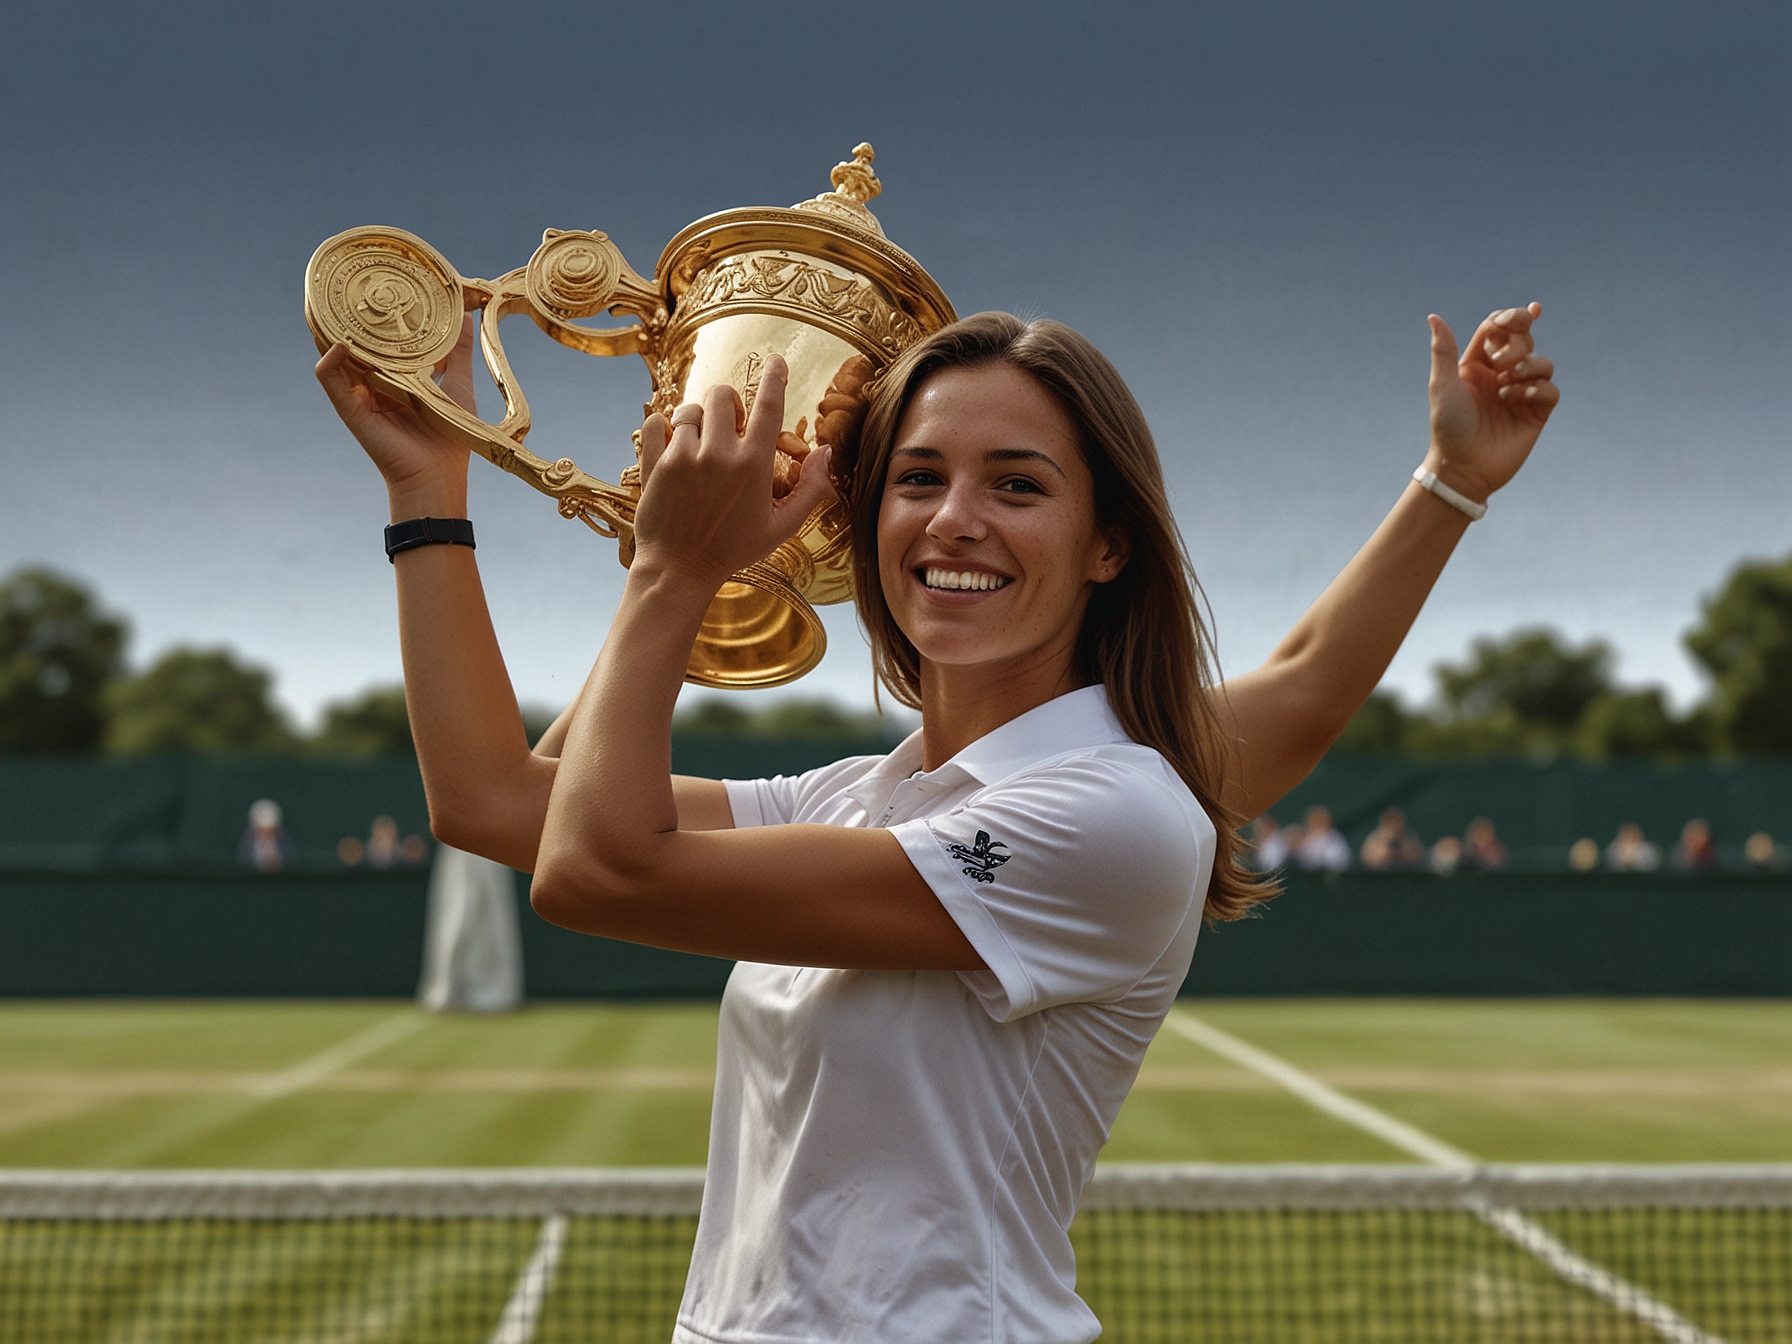 A victorious women’s singles champion holding the Wimbledon trophy, symbolizing the tournament's dedication to equal prize money and the significant financial reward of £2.35 million.